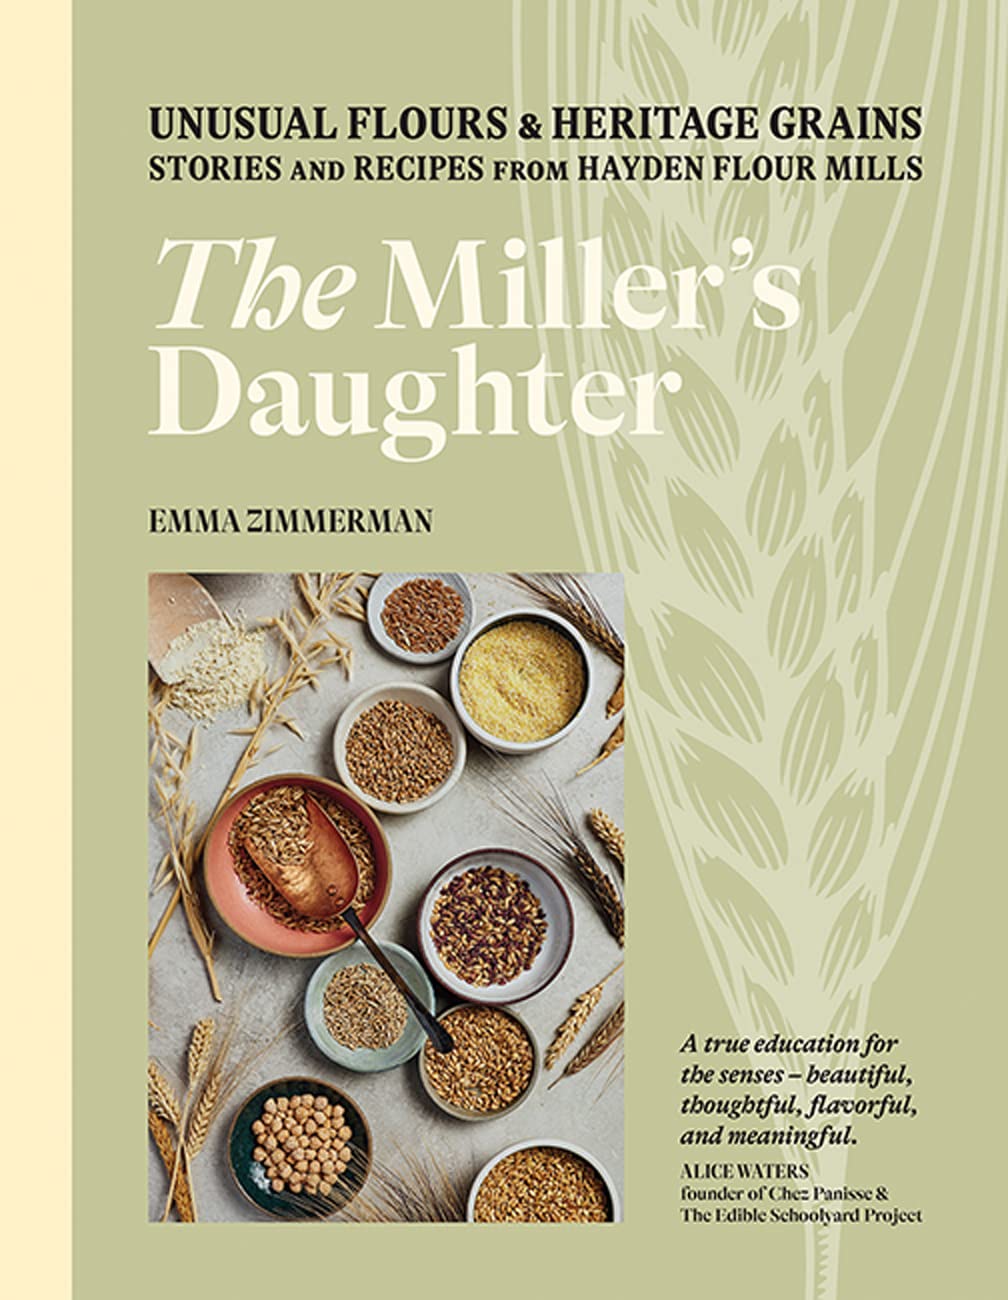 The Miller's Daughter is a cookbook at the forefront of America's heritage grain movement with 80 glorious recipes and beautiful, candid stories that celebrate community, agriculture, sustainability, and the place of grains at every table.